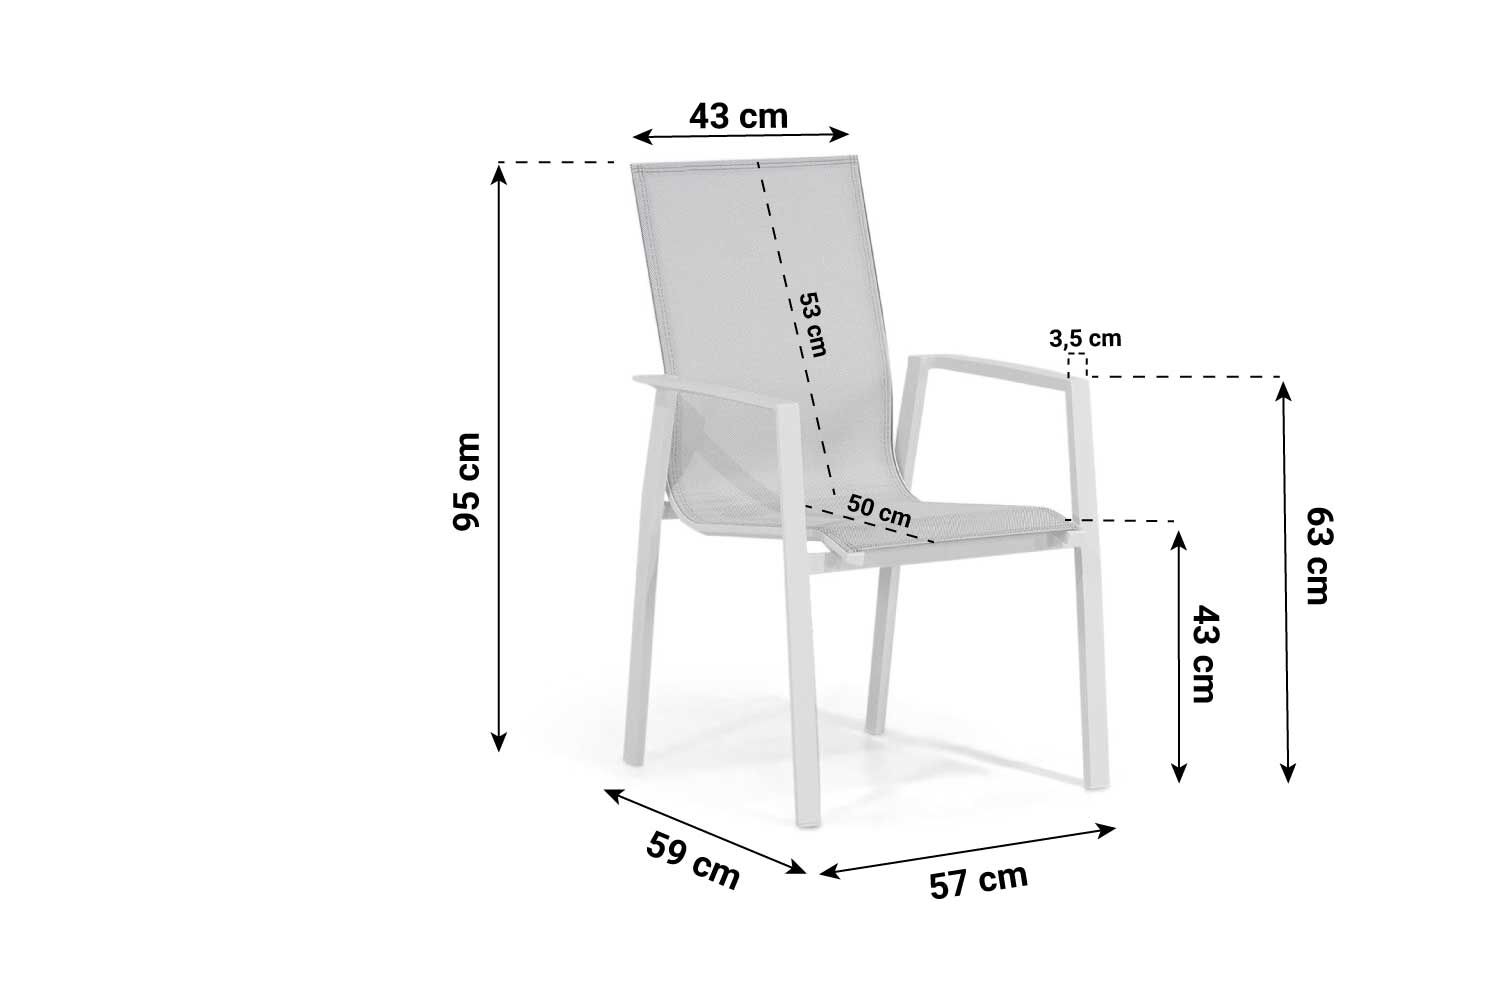 Lifestyle Ultimate/Los Angeles 200 cm dining tuinset 5-delig